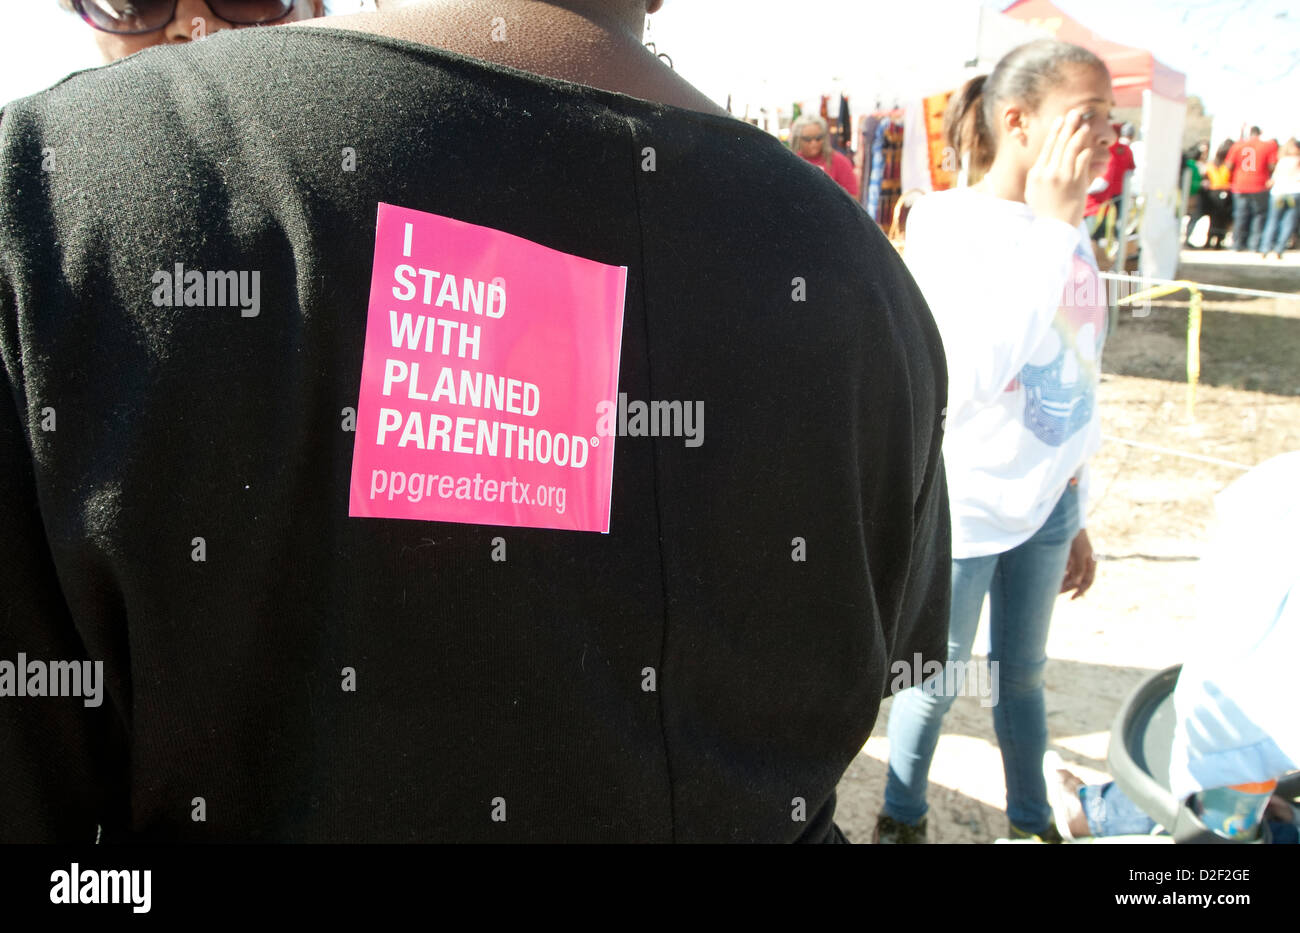 Planned Parenthood items include pens, stickers placed on shirts at information booth during MLK outdoor festival in Austin, TX Stock Photo